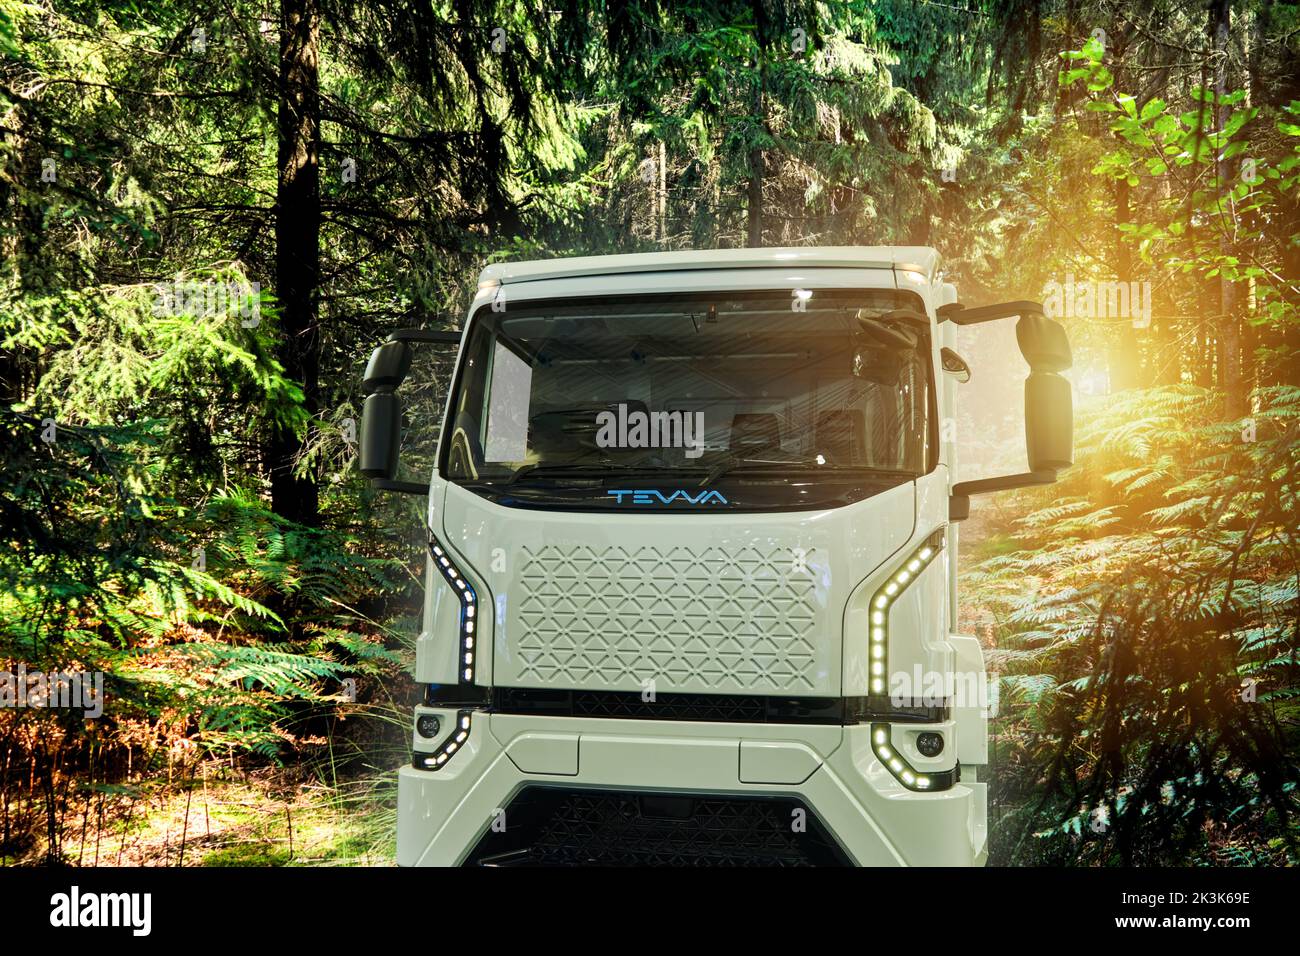 Tevva truck with hydrogen-based hydroelectric zero-emission propulsion composed in a green forest area, vehicle location Hannover, Germany, September Stock Photo